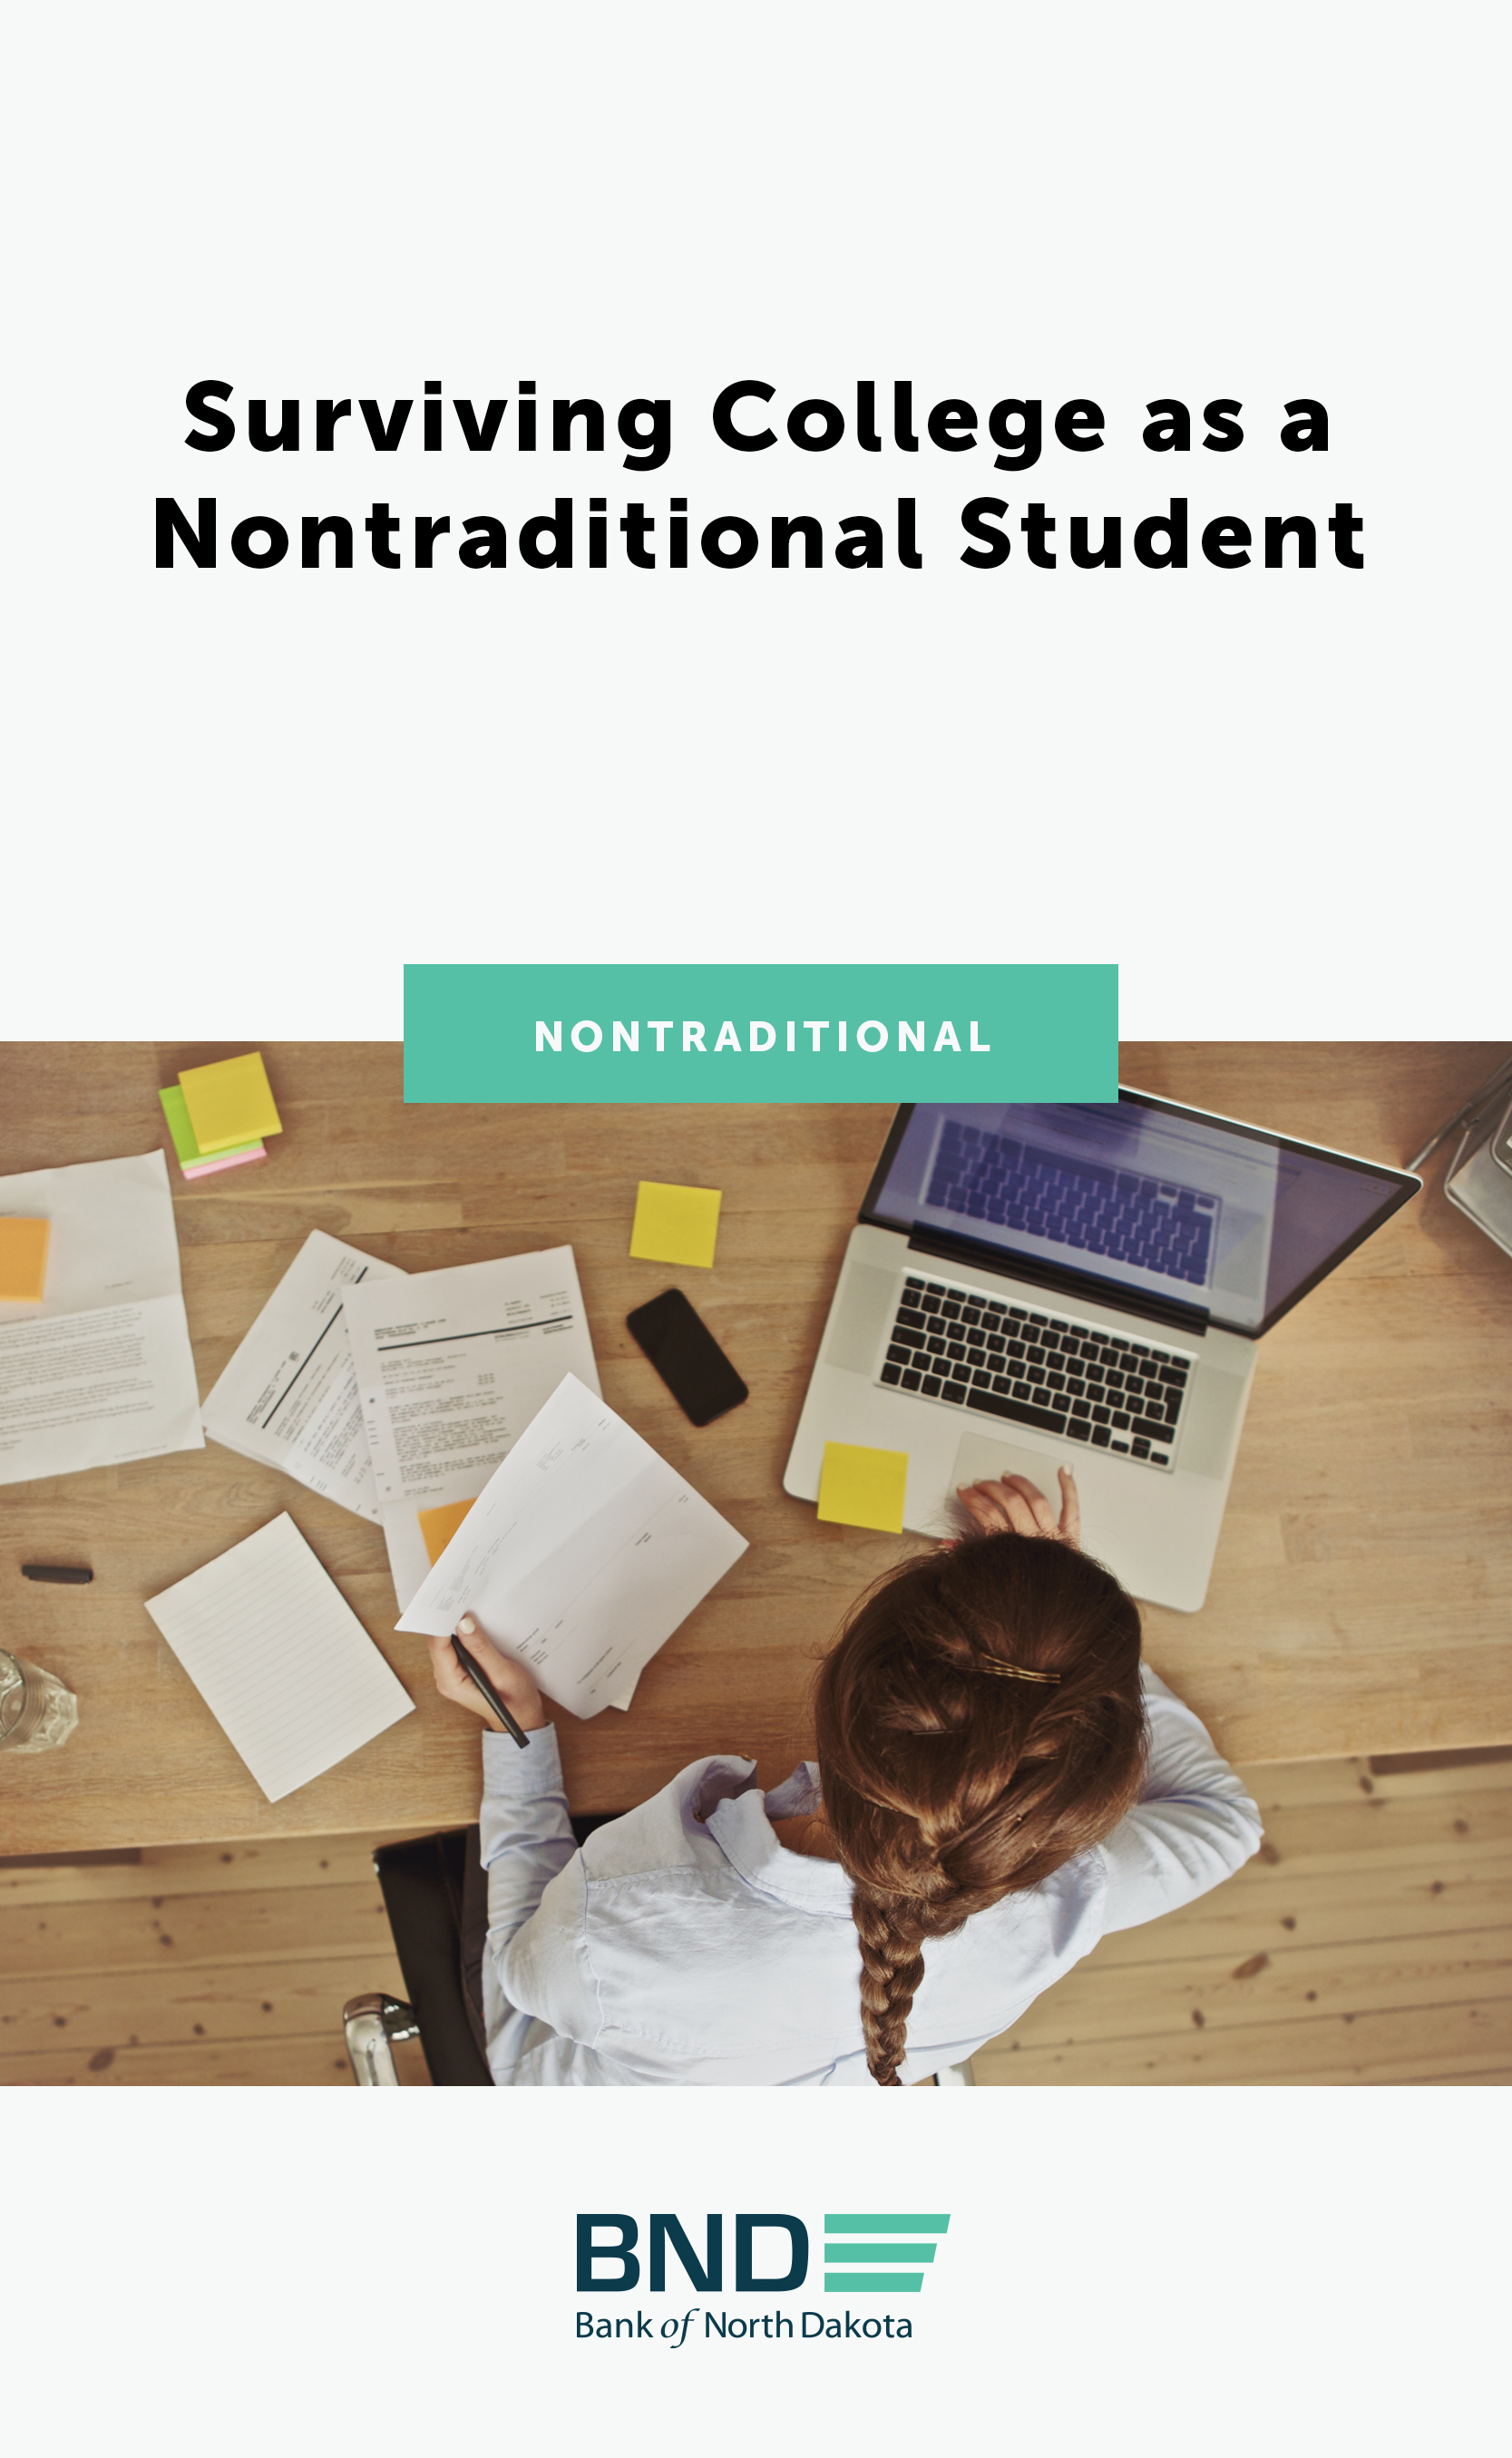 Surviving-College-Nontraditional-Student